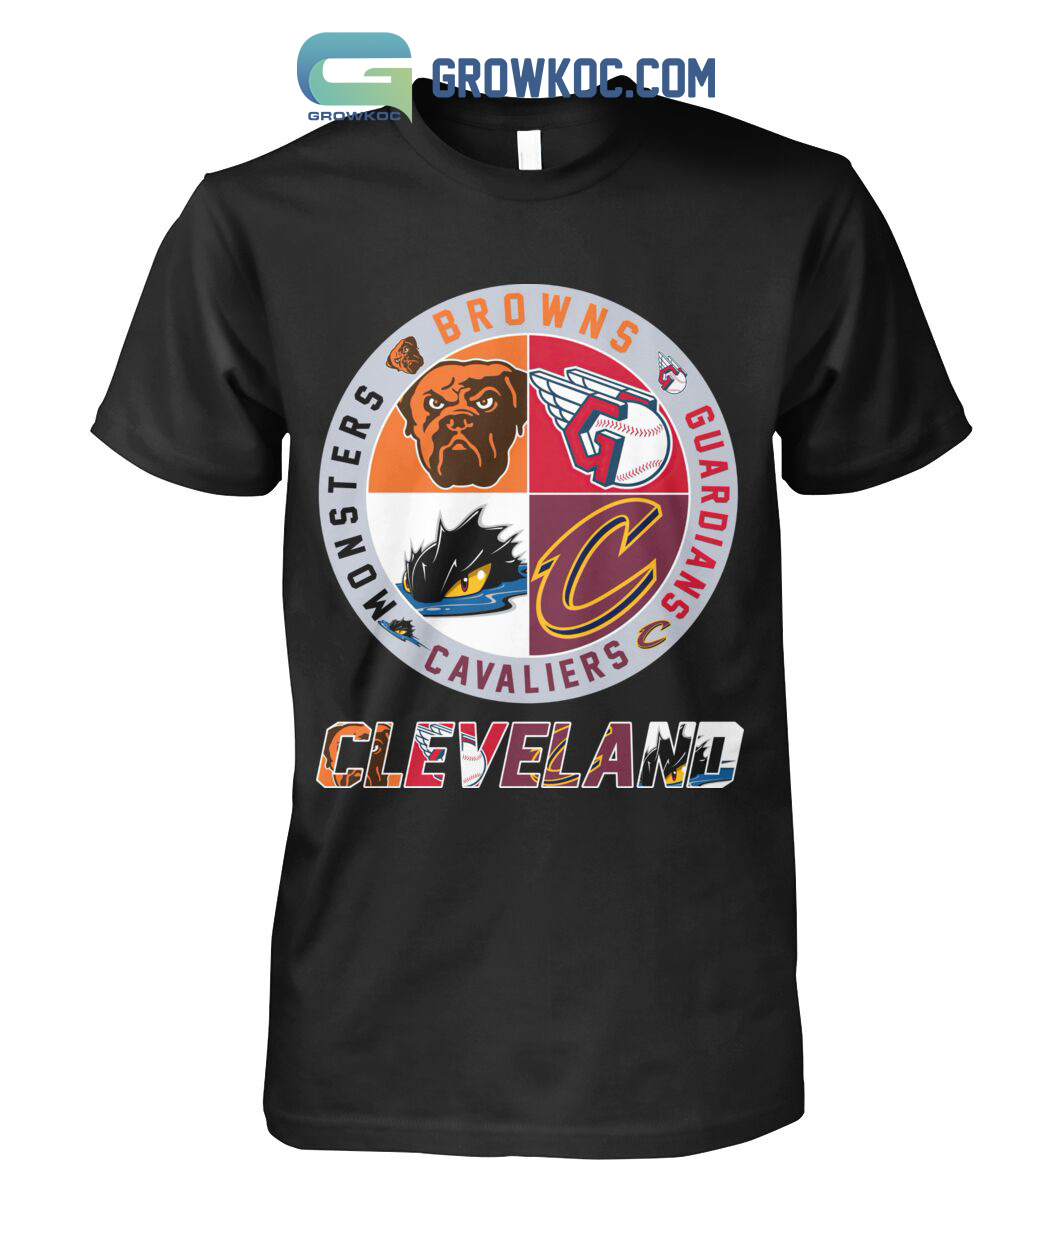 Cleveland Browns Official Jerseys, Hoods, T-Shirts,Caps & Clothing UK